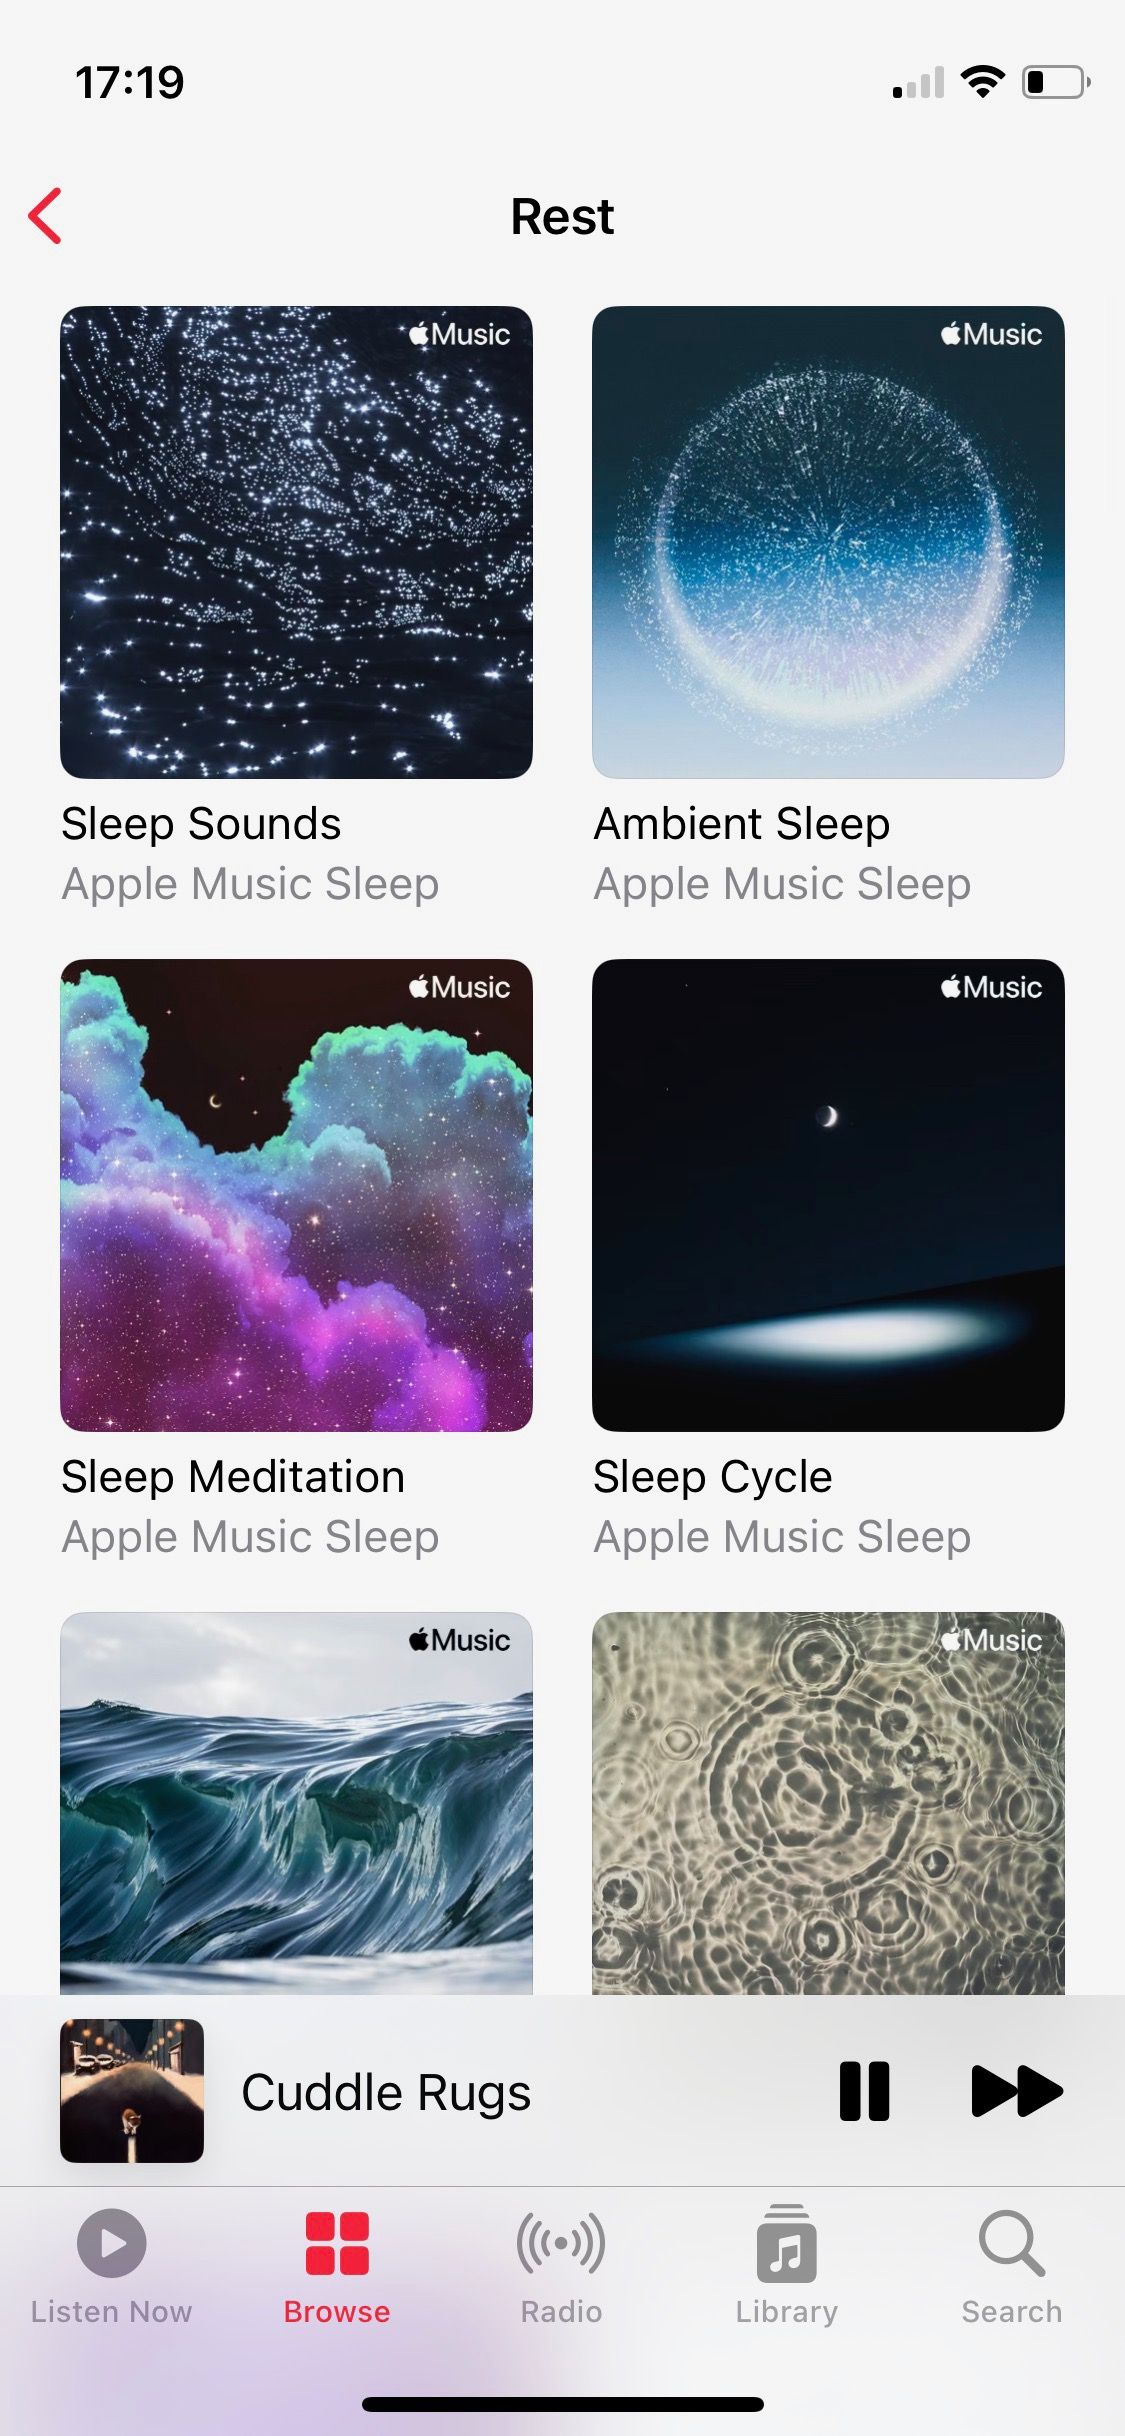 Screenshot of Apple Music Wellbeing Rest section